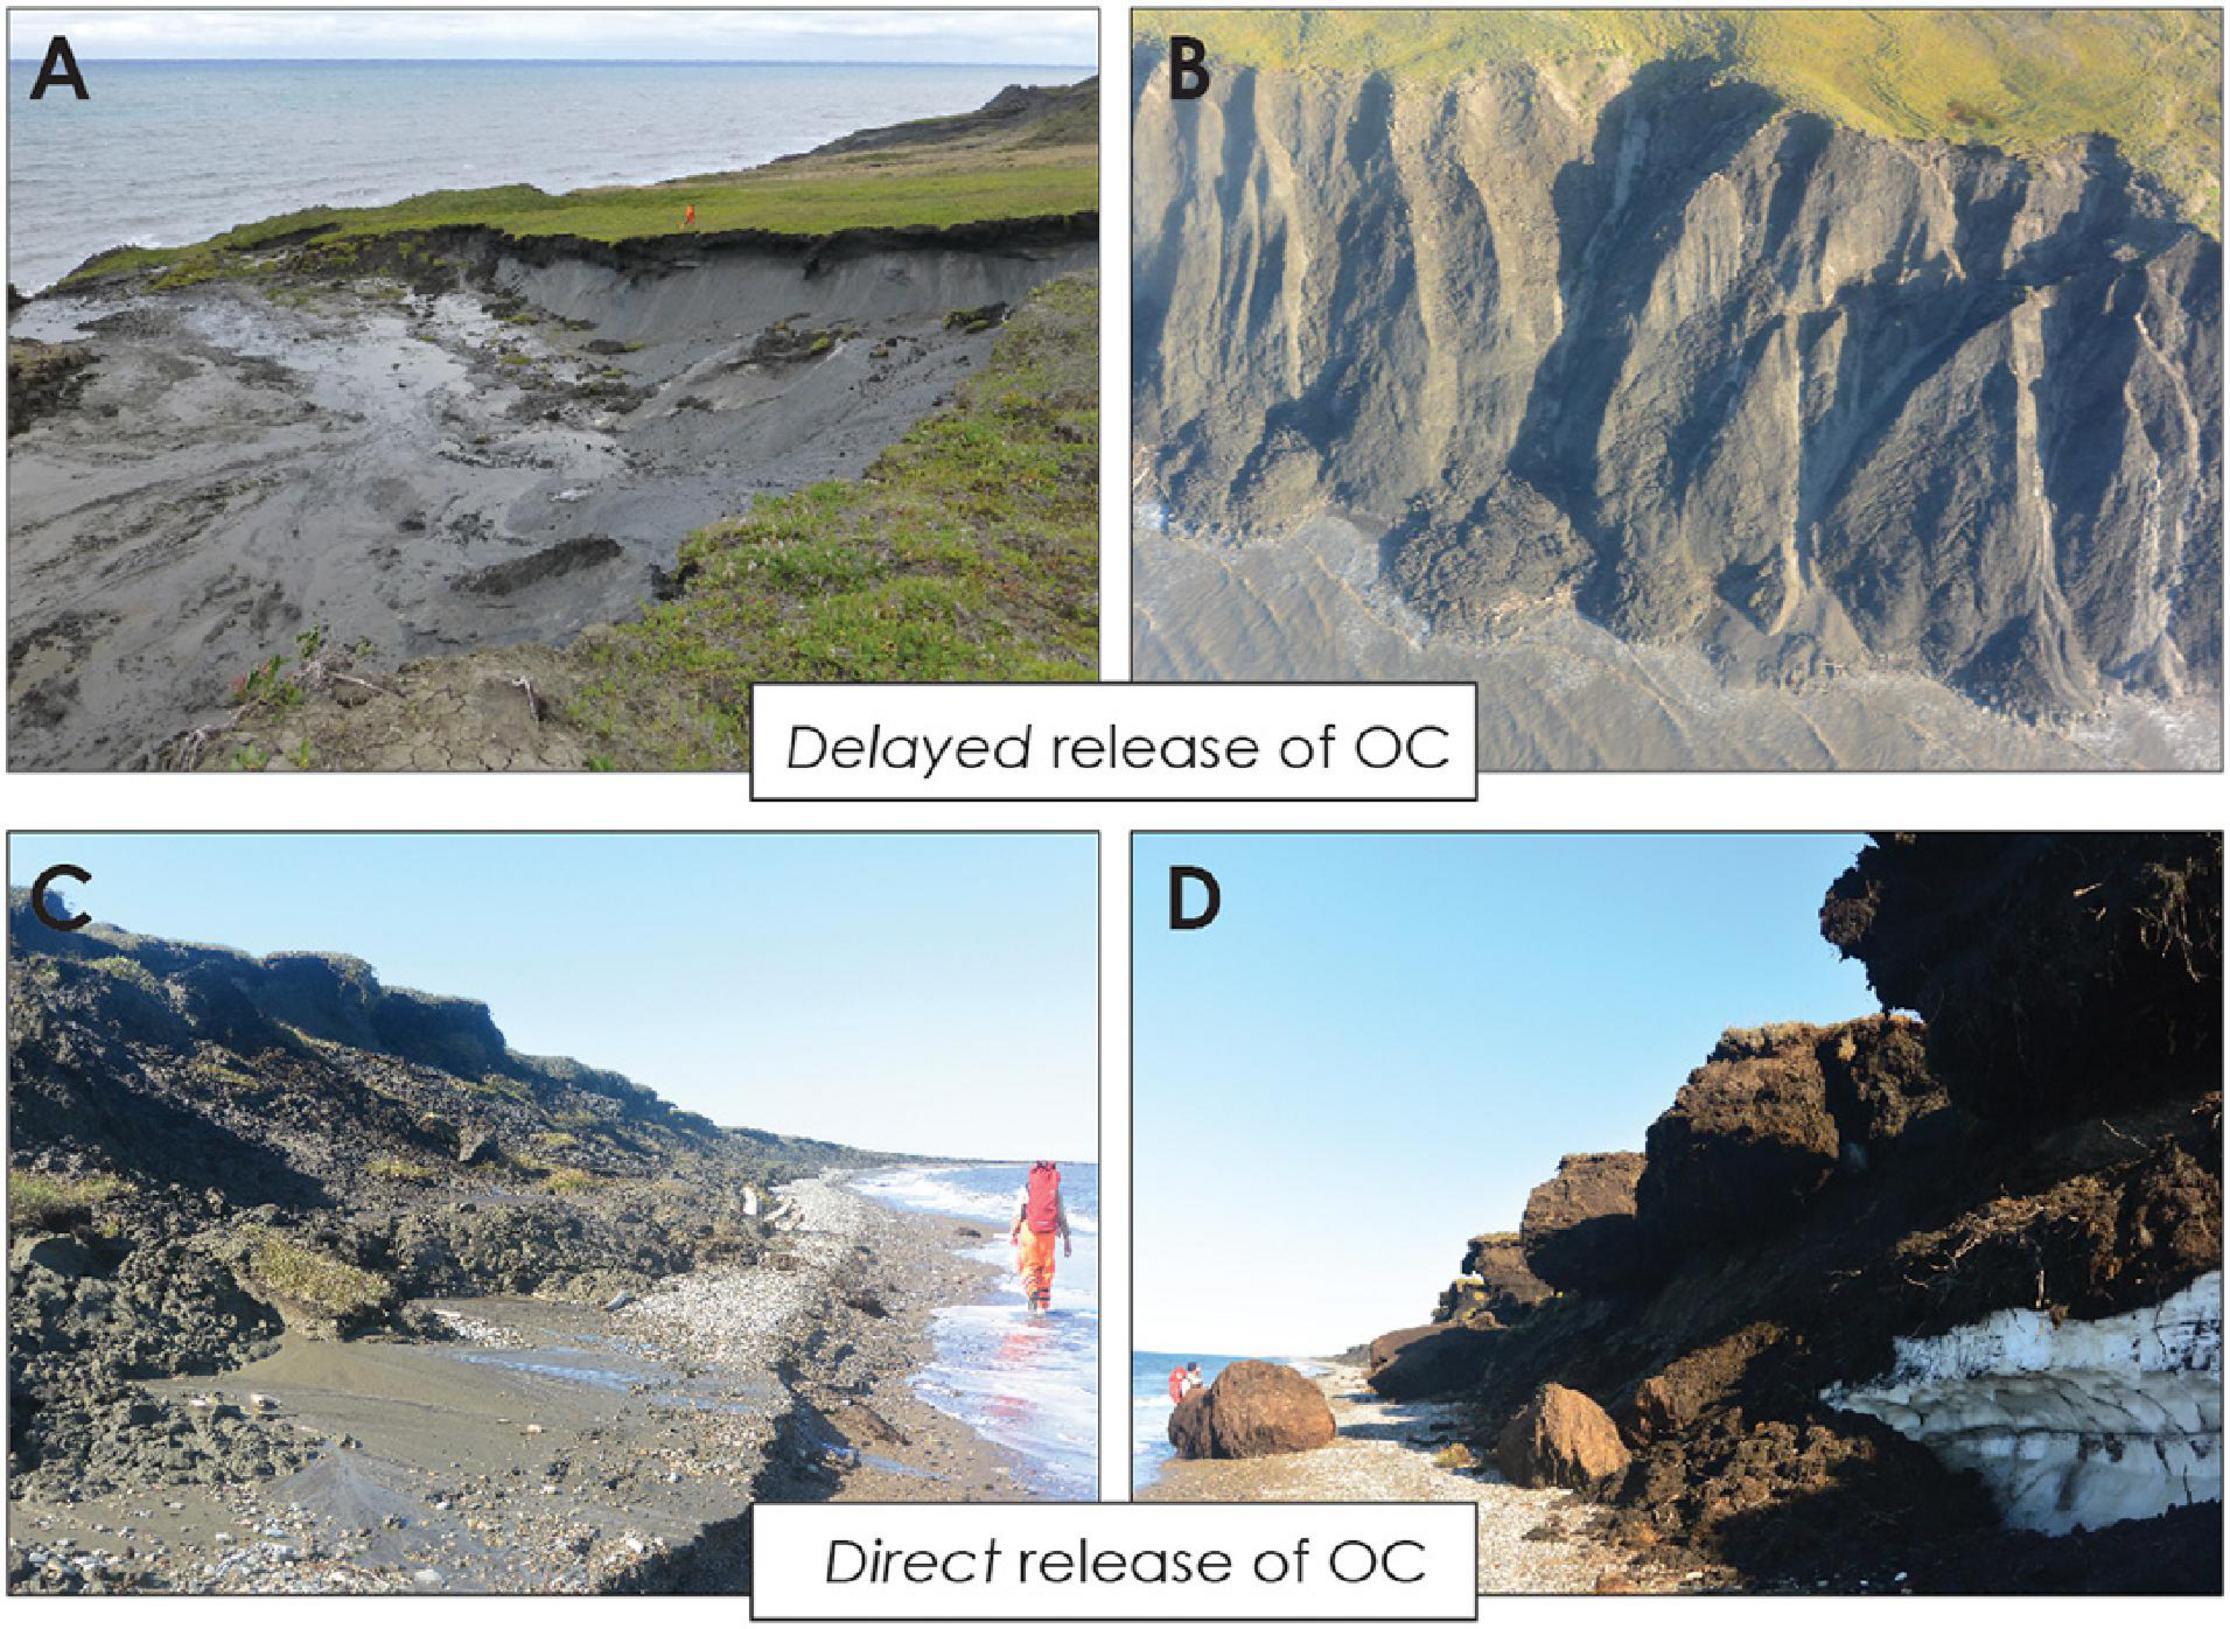 Frontiers Permafrost Carbon And Co2 Pathways Differ At Contrasting Coastal Erosion Sites In The Canadian Arctic Earth Science